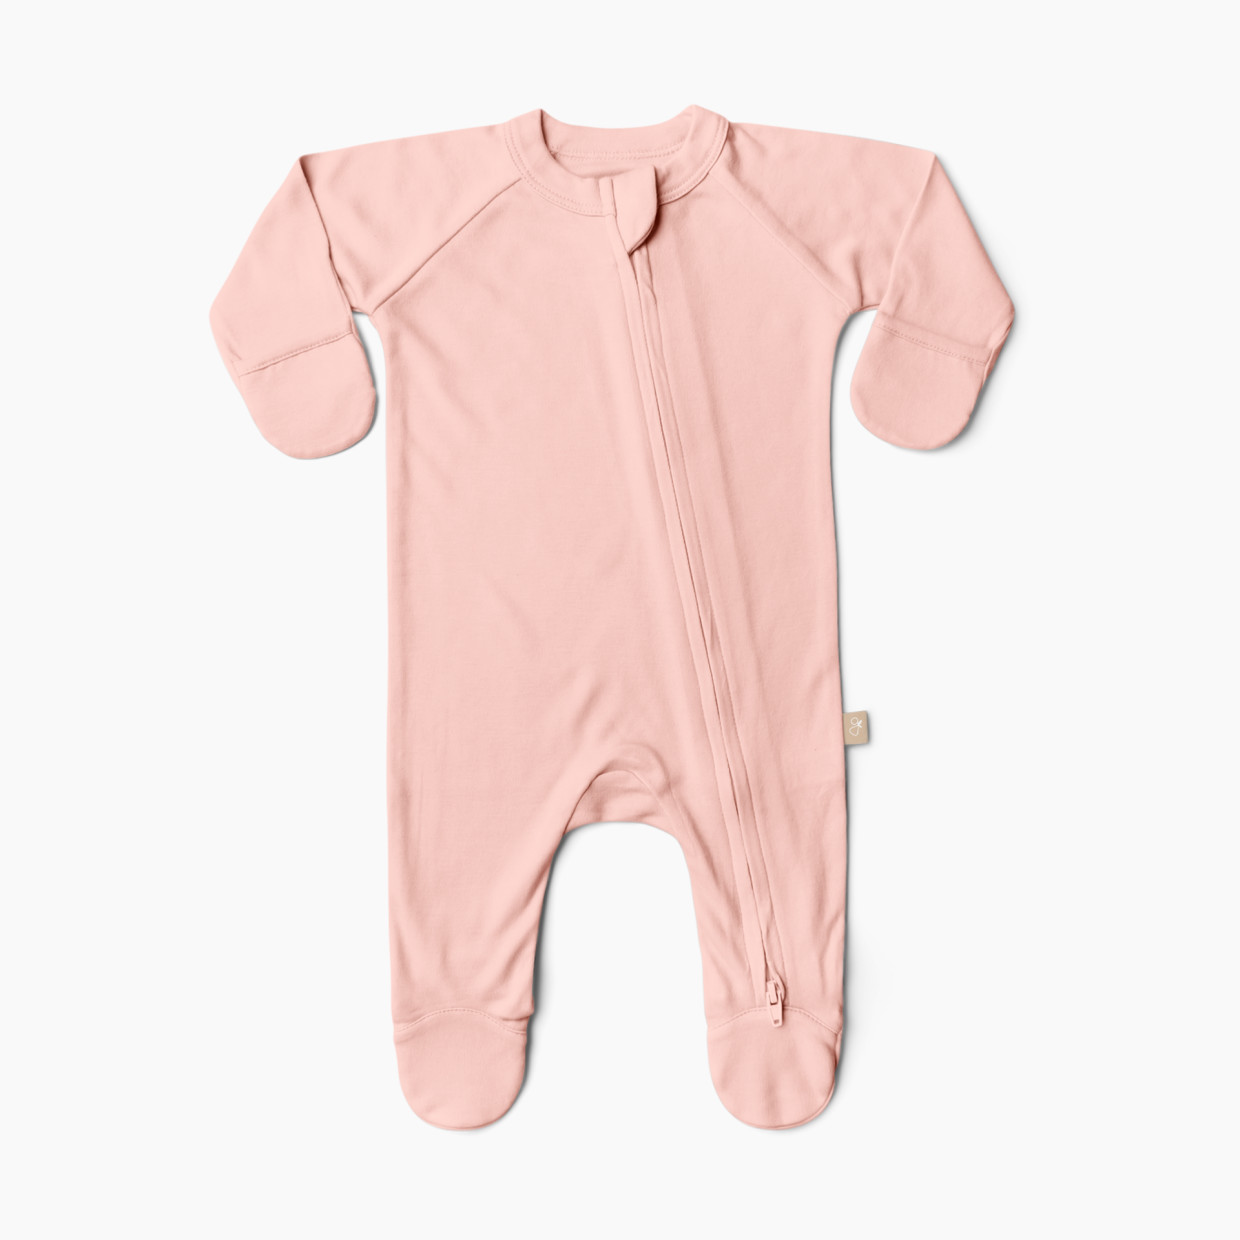 Goumi Kids x Babylist Grow With You Footie - Loose Fit - Blush, 0-3 M.